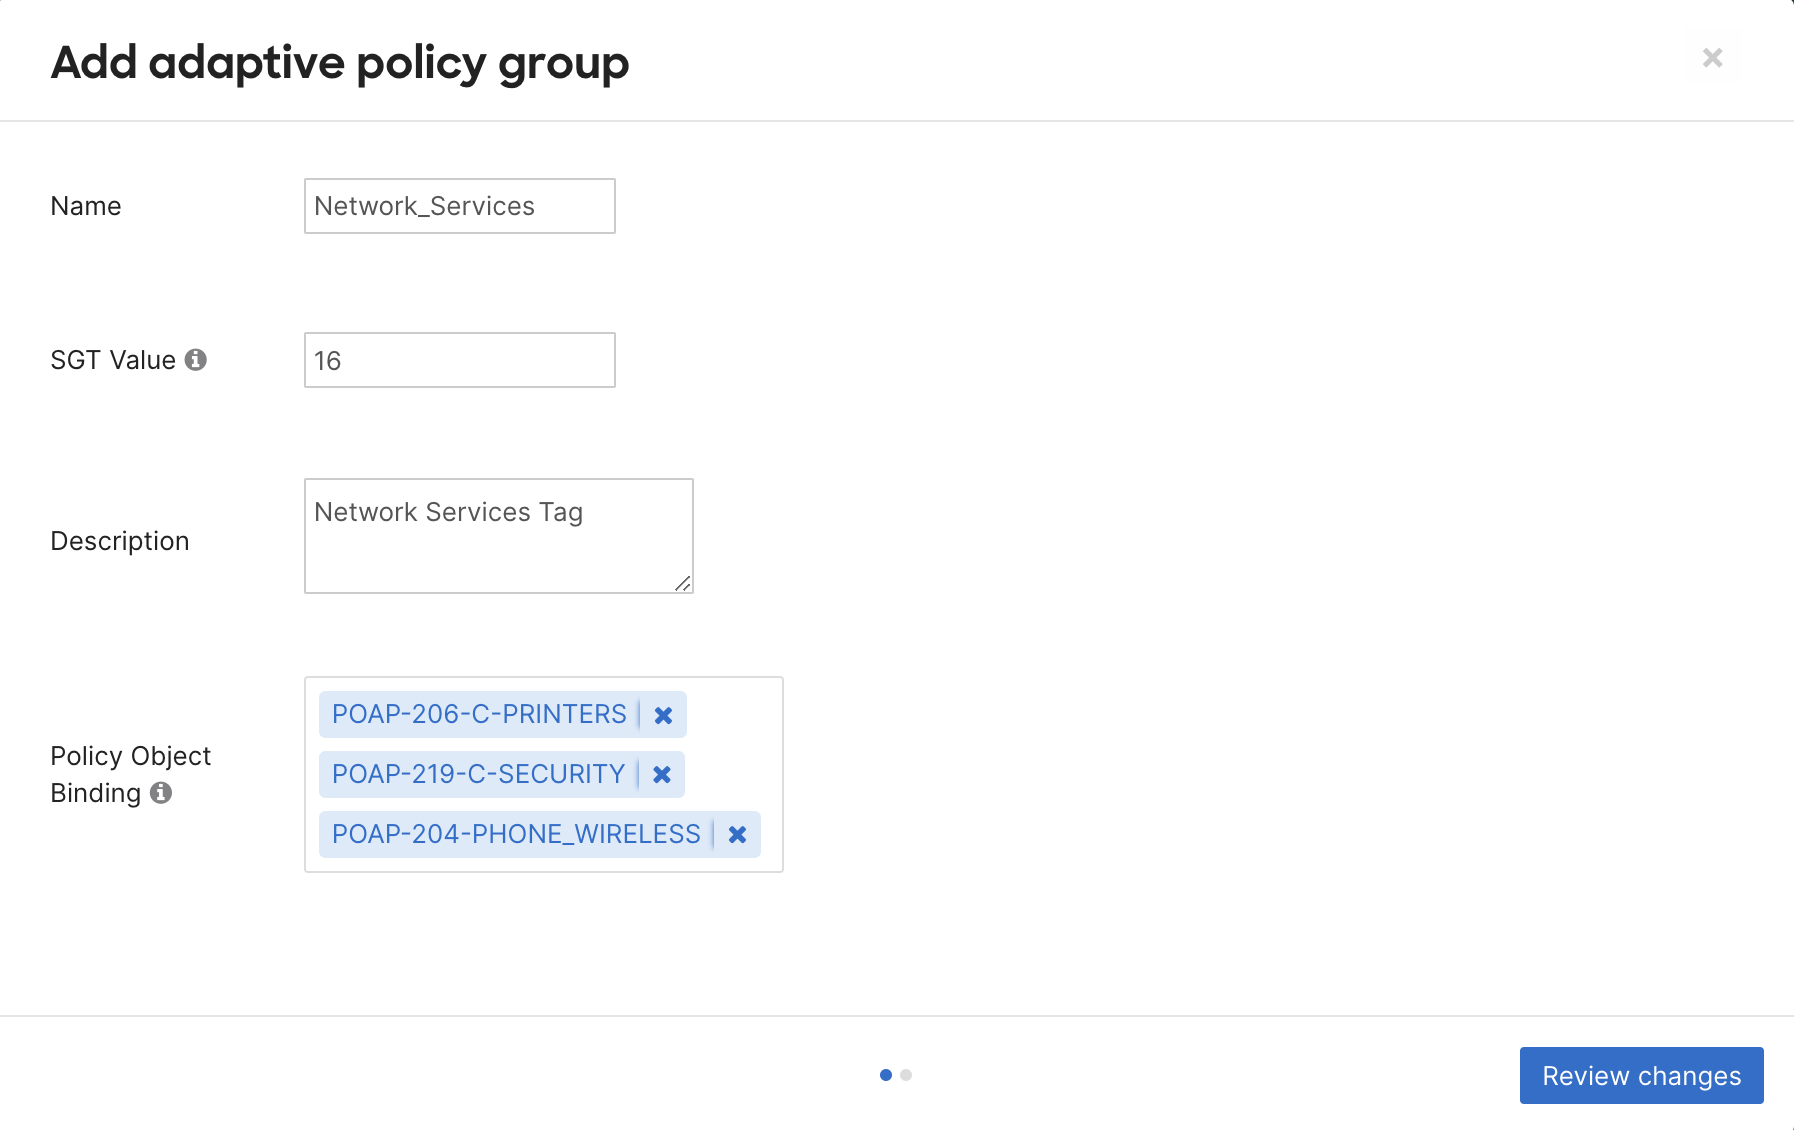 Pop-up to specify the group Name, SGT Value, Description for the group and an optional Policy Object Binding 